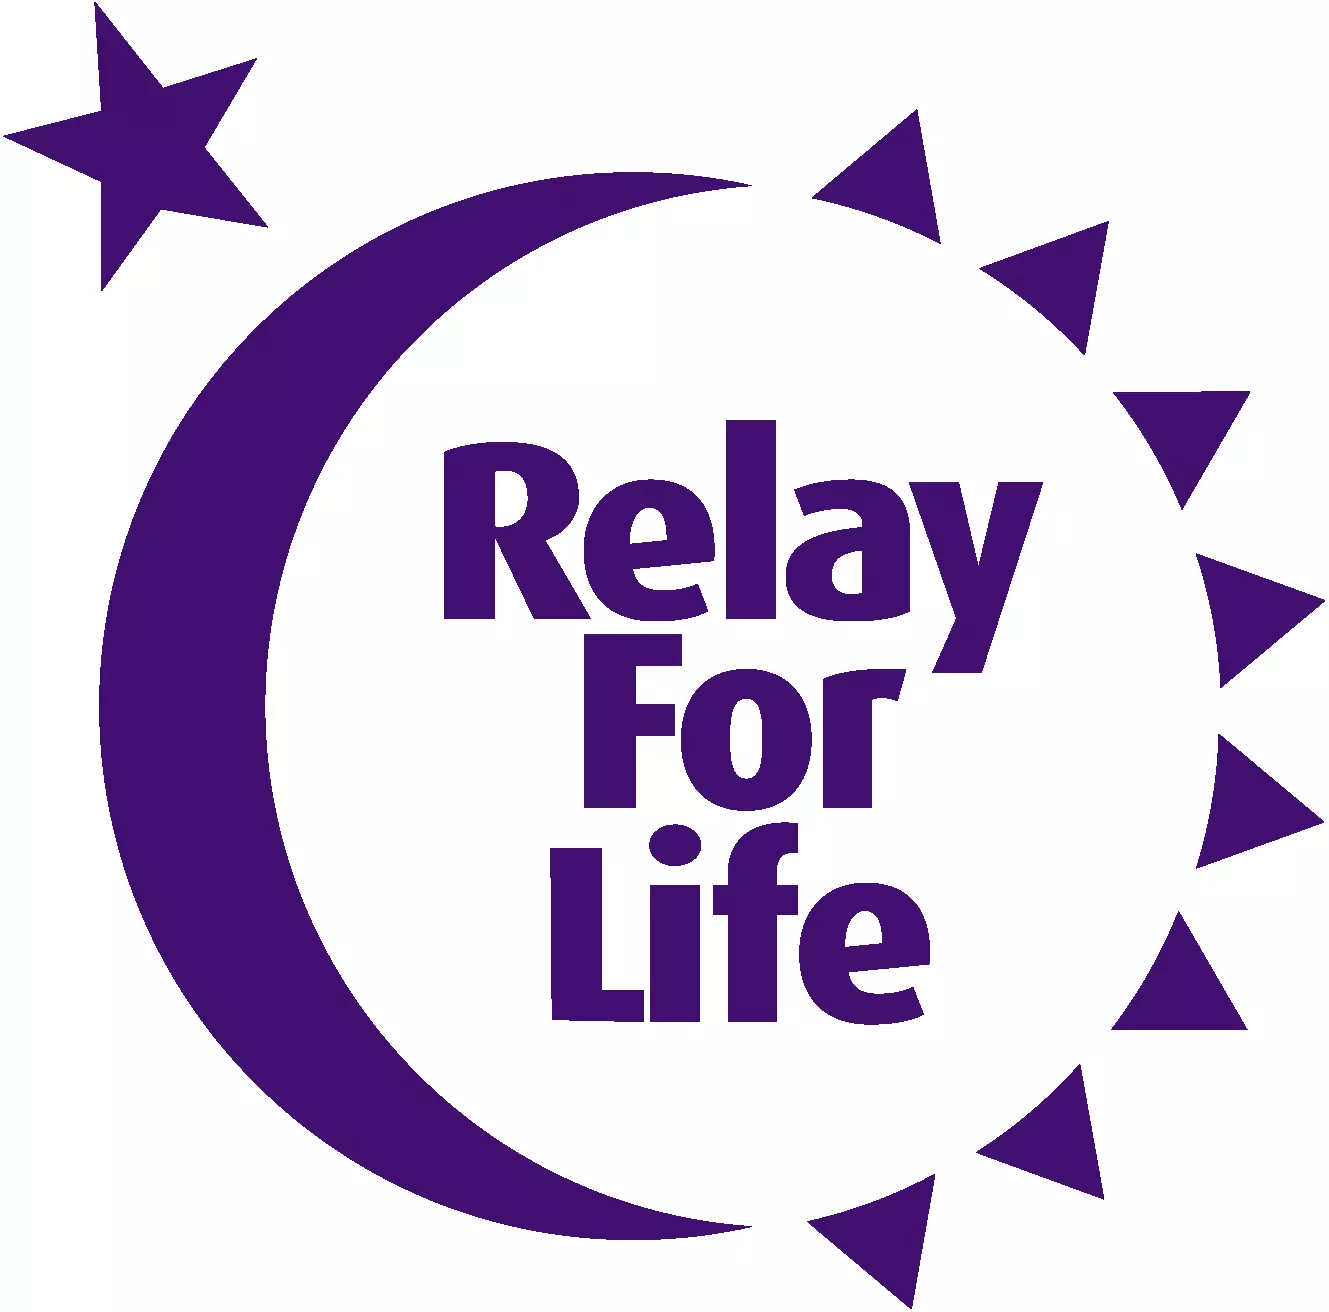 Get ready to Relay!